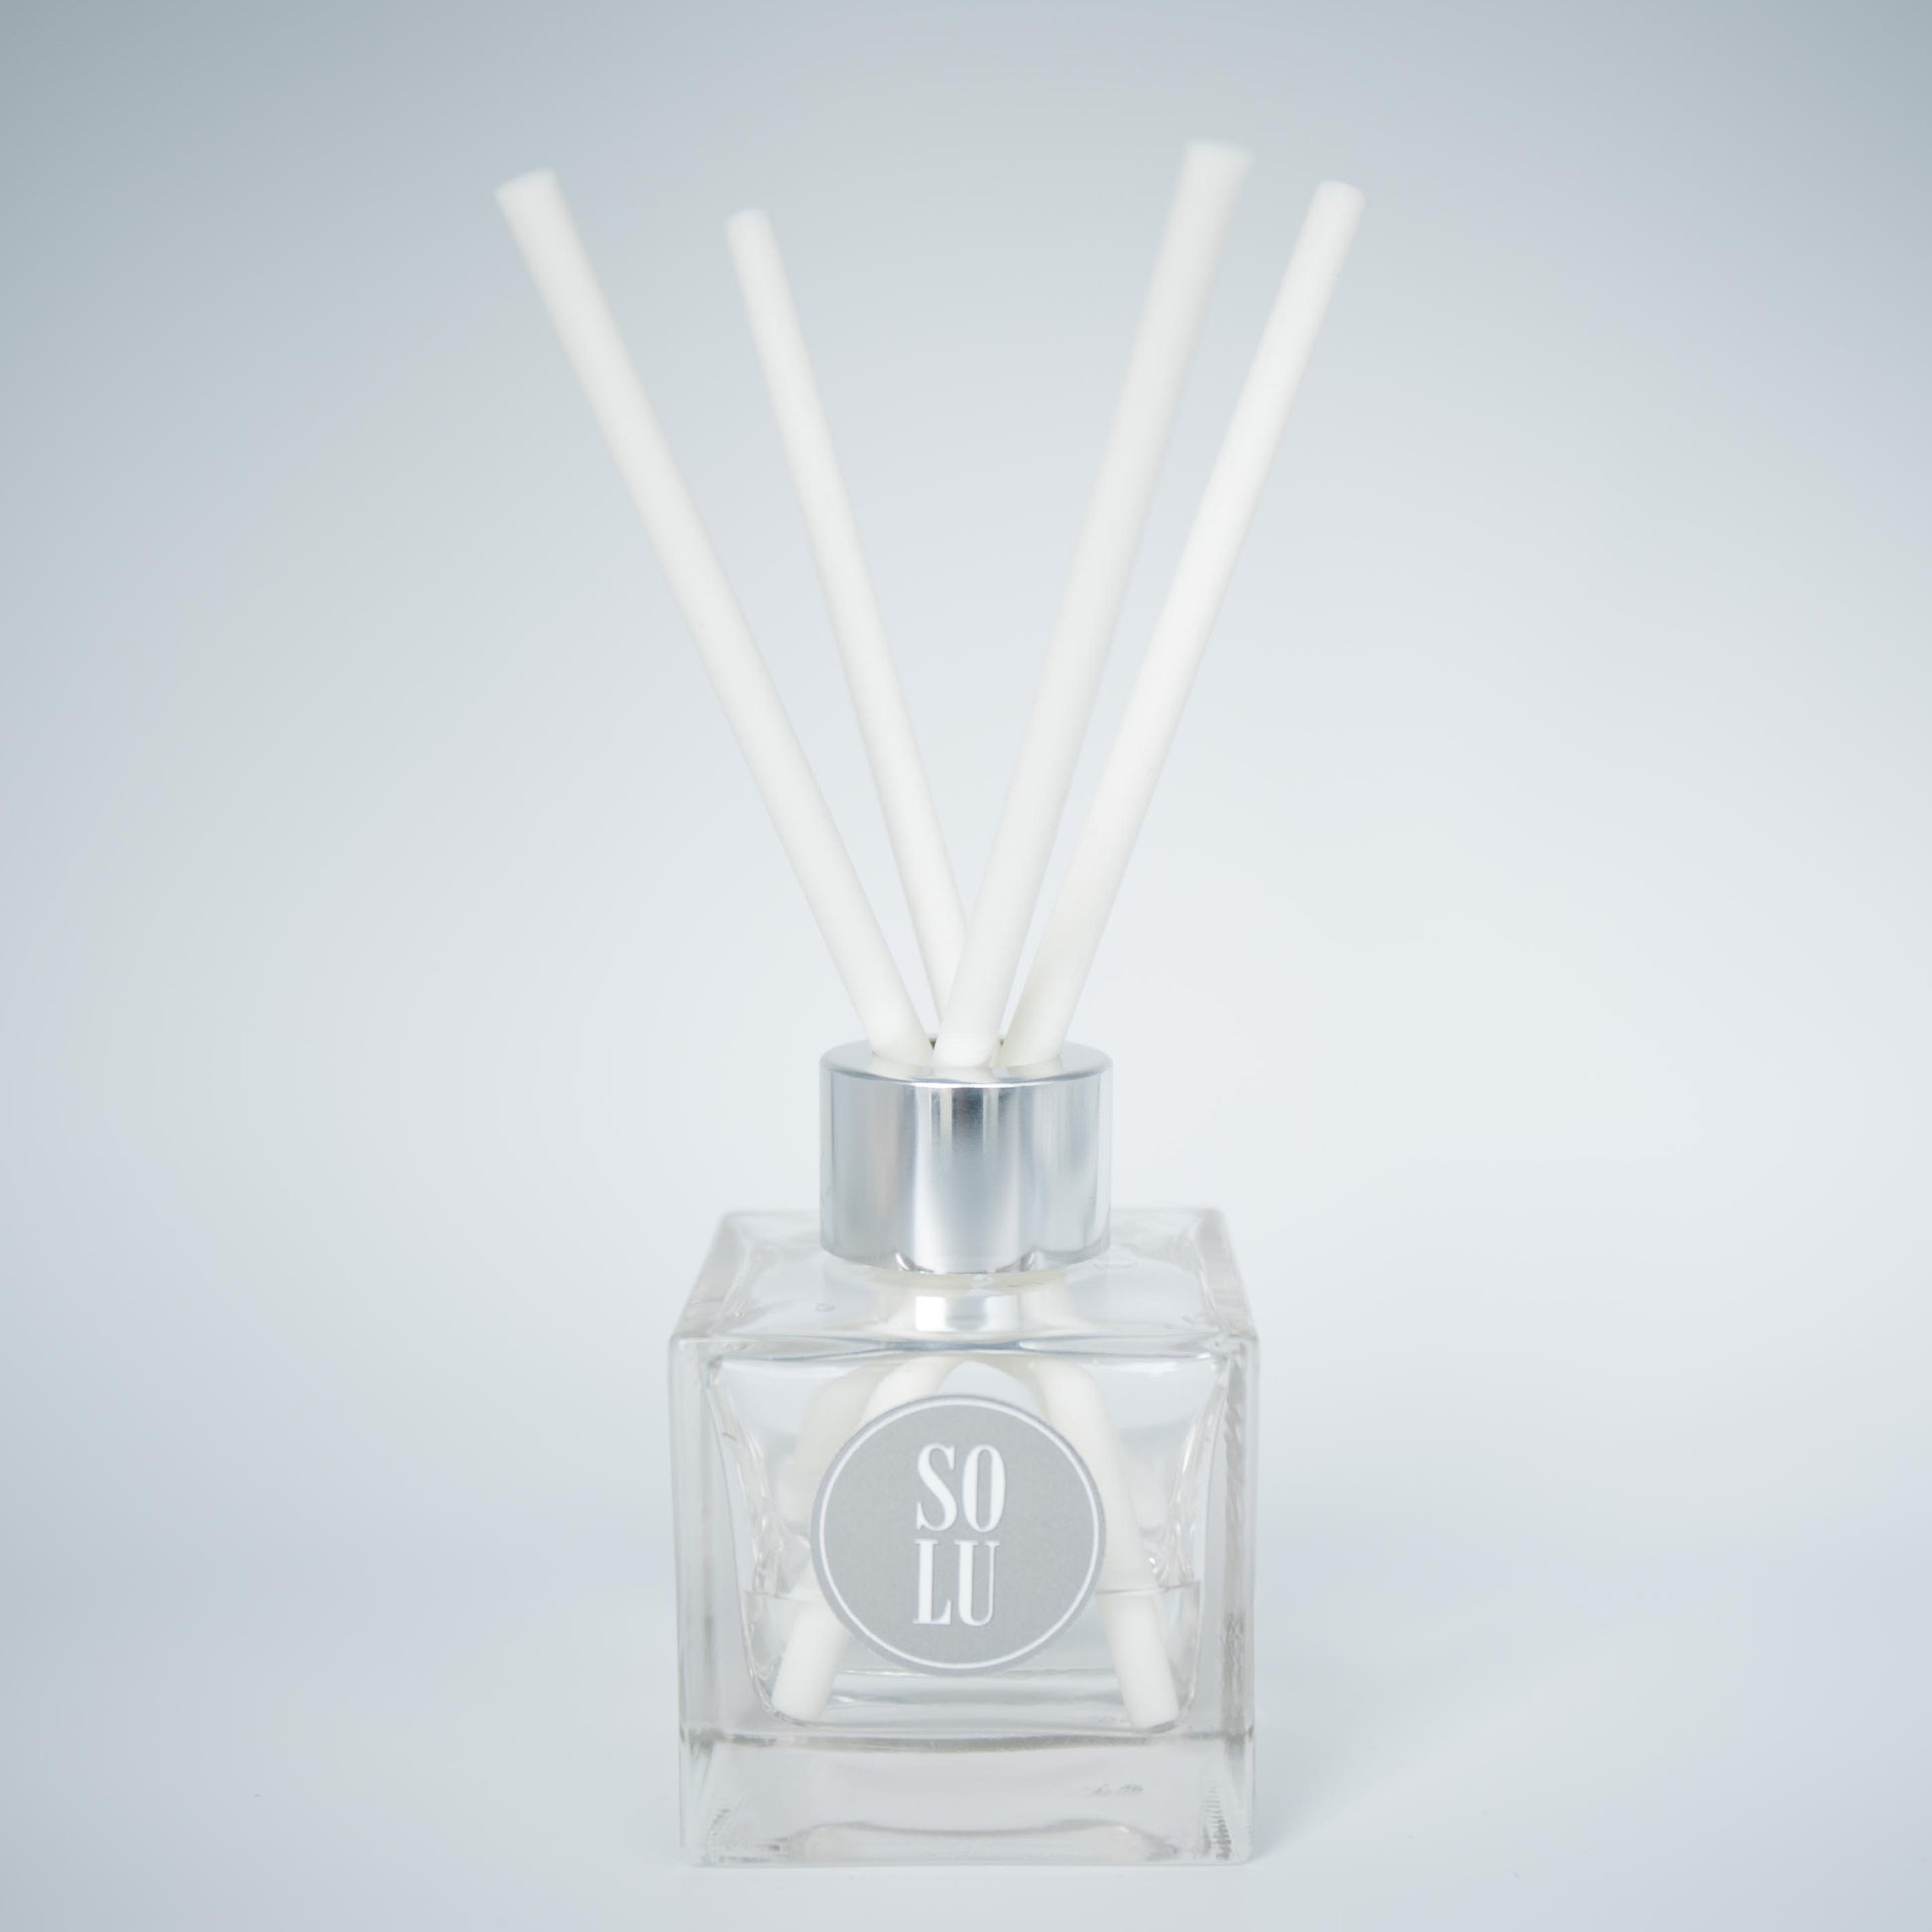 Fragrance Diffuser Reeds x4 - Solu Candles